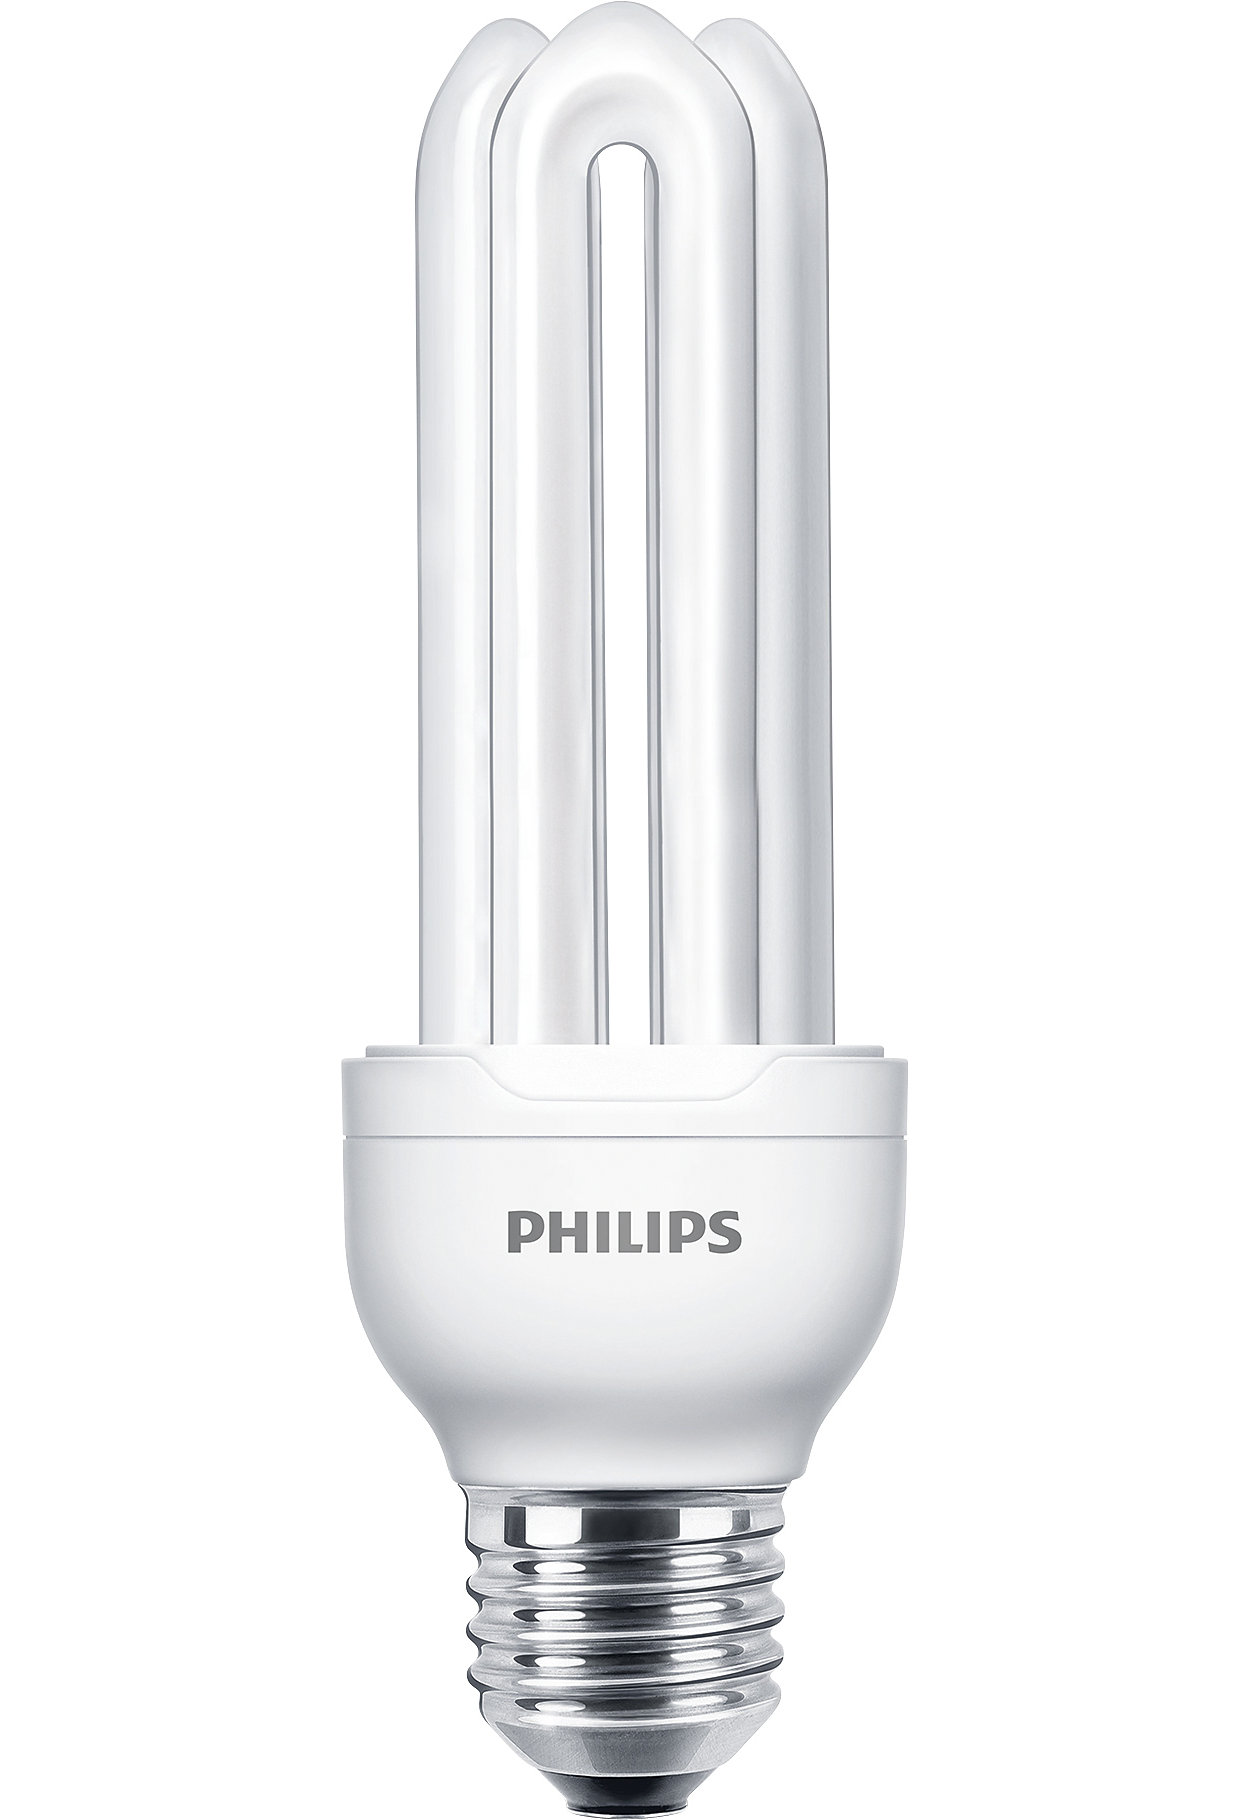 Small and powerful energy saver gives high quality light, with compact design